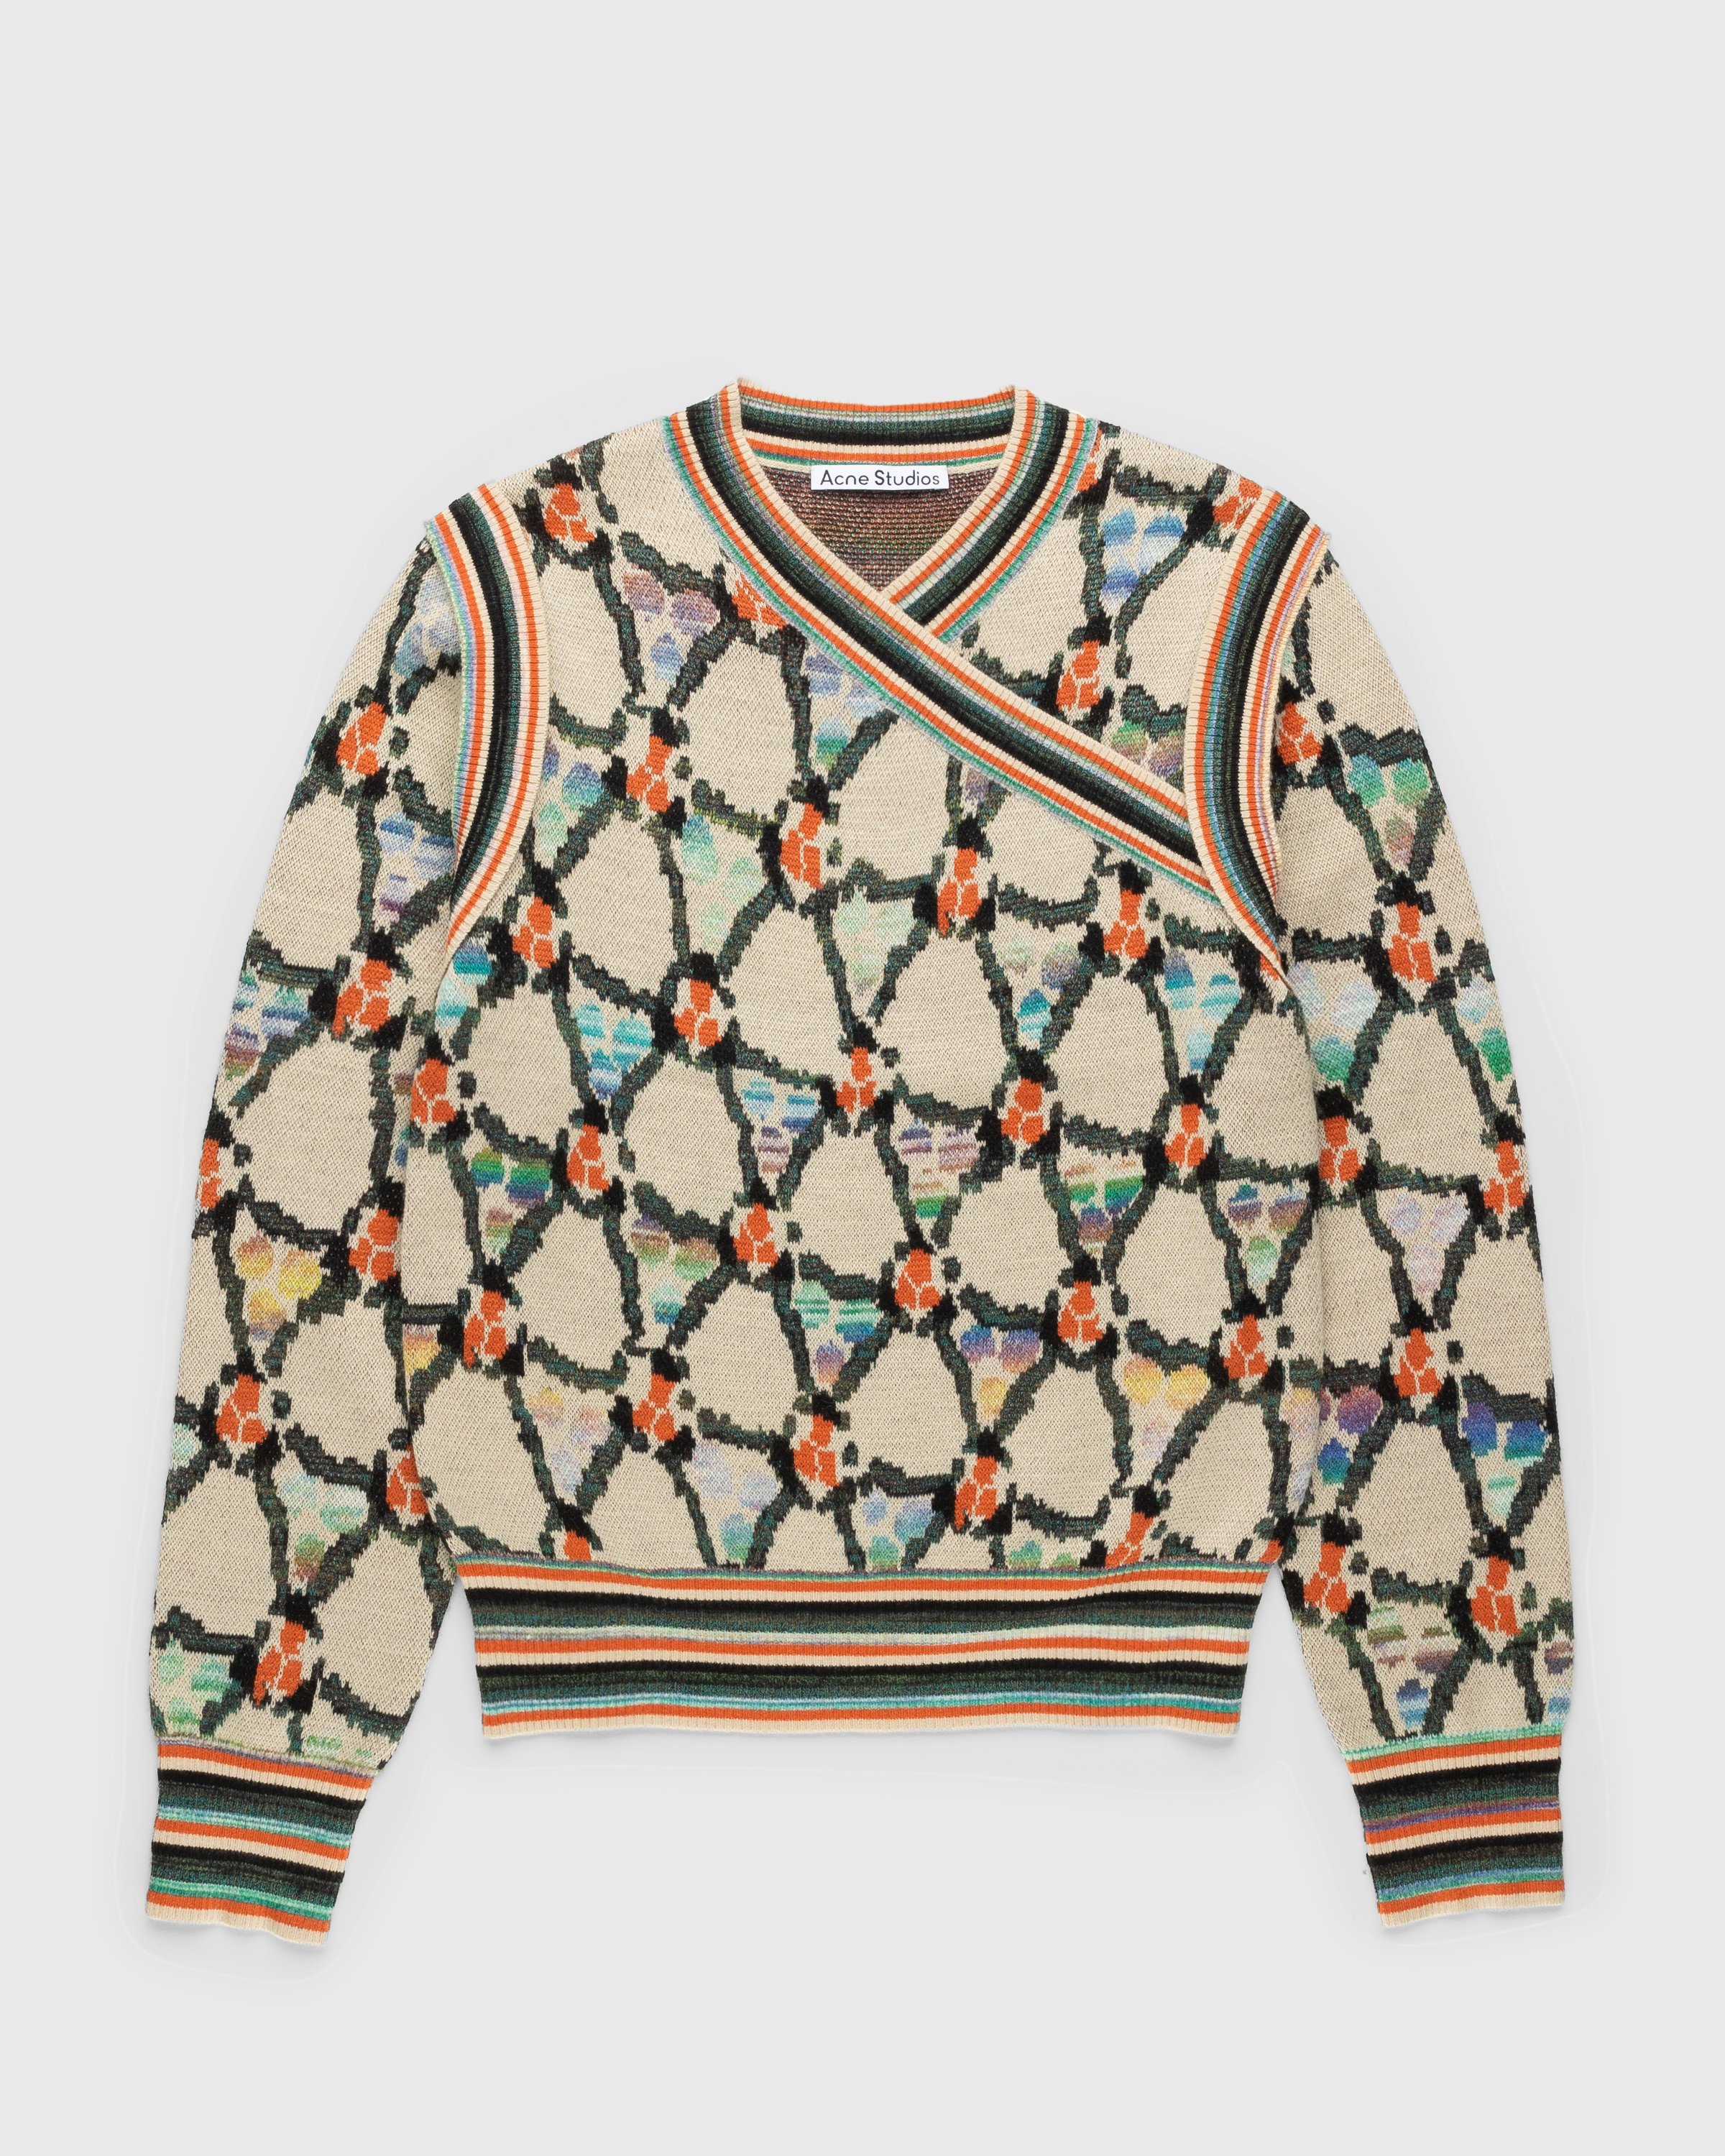 Acne Studios - Wrapped Sweater Beige - Clothing - Multi - Image 1